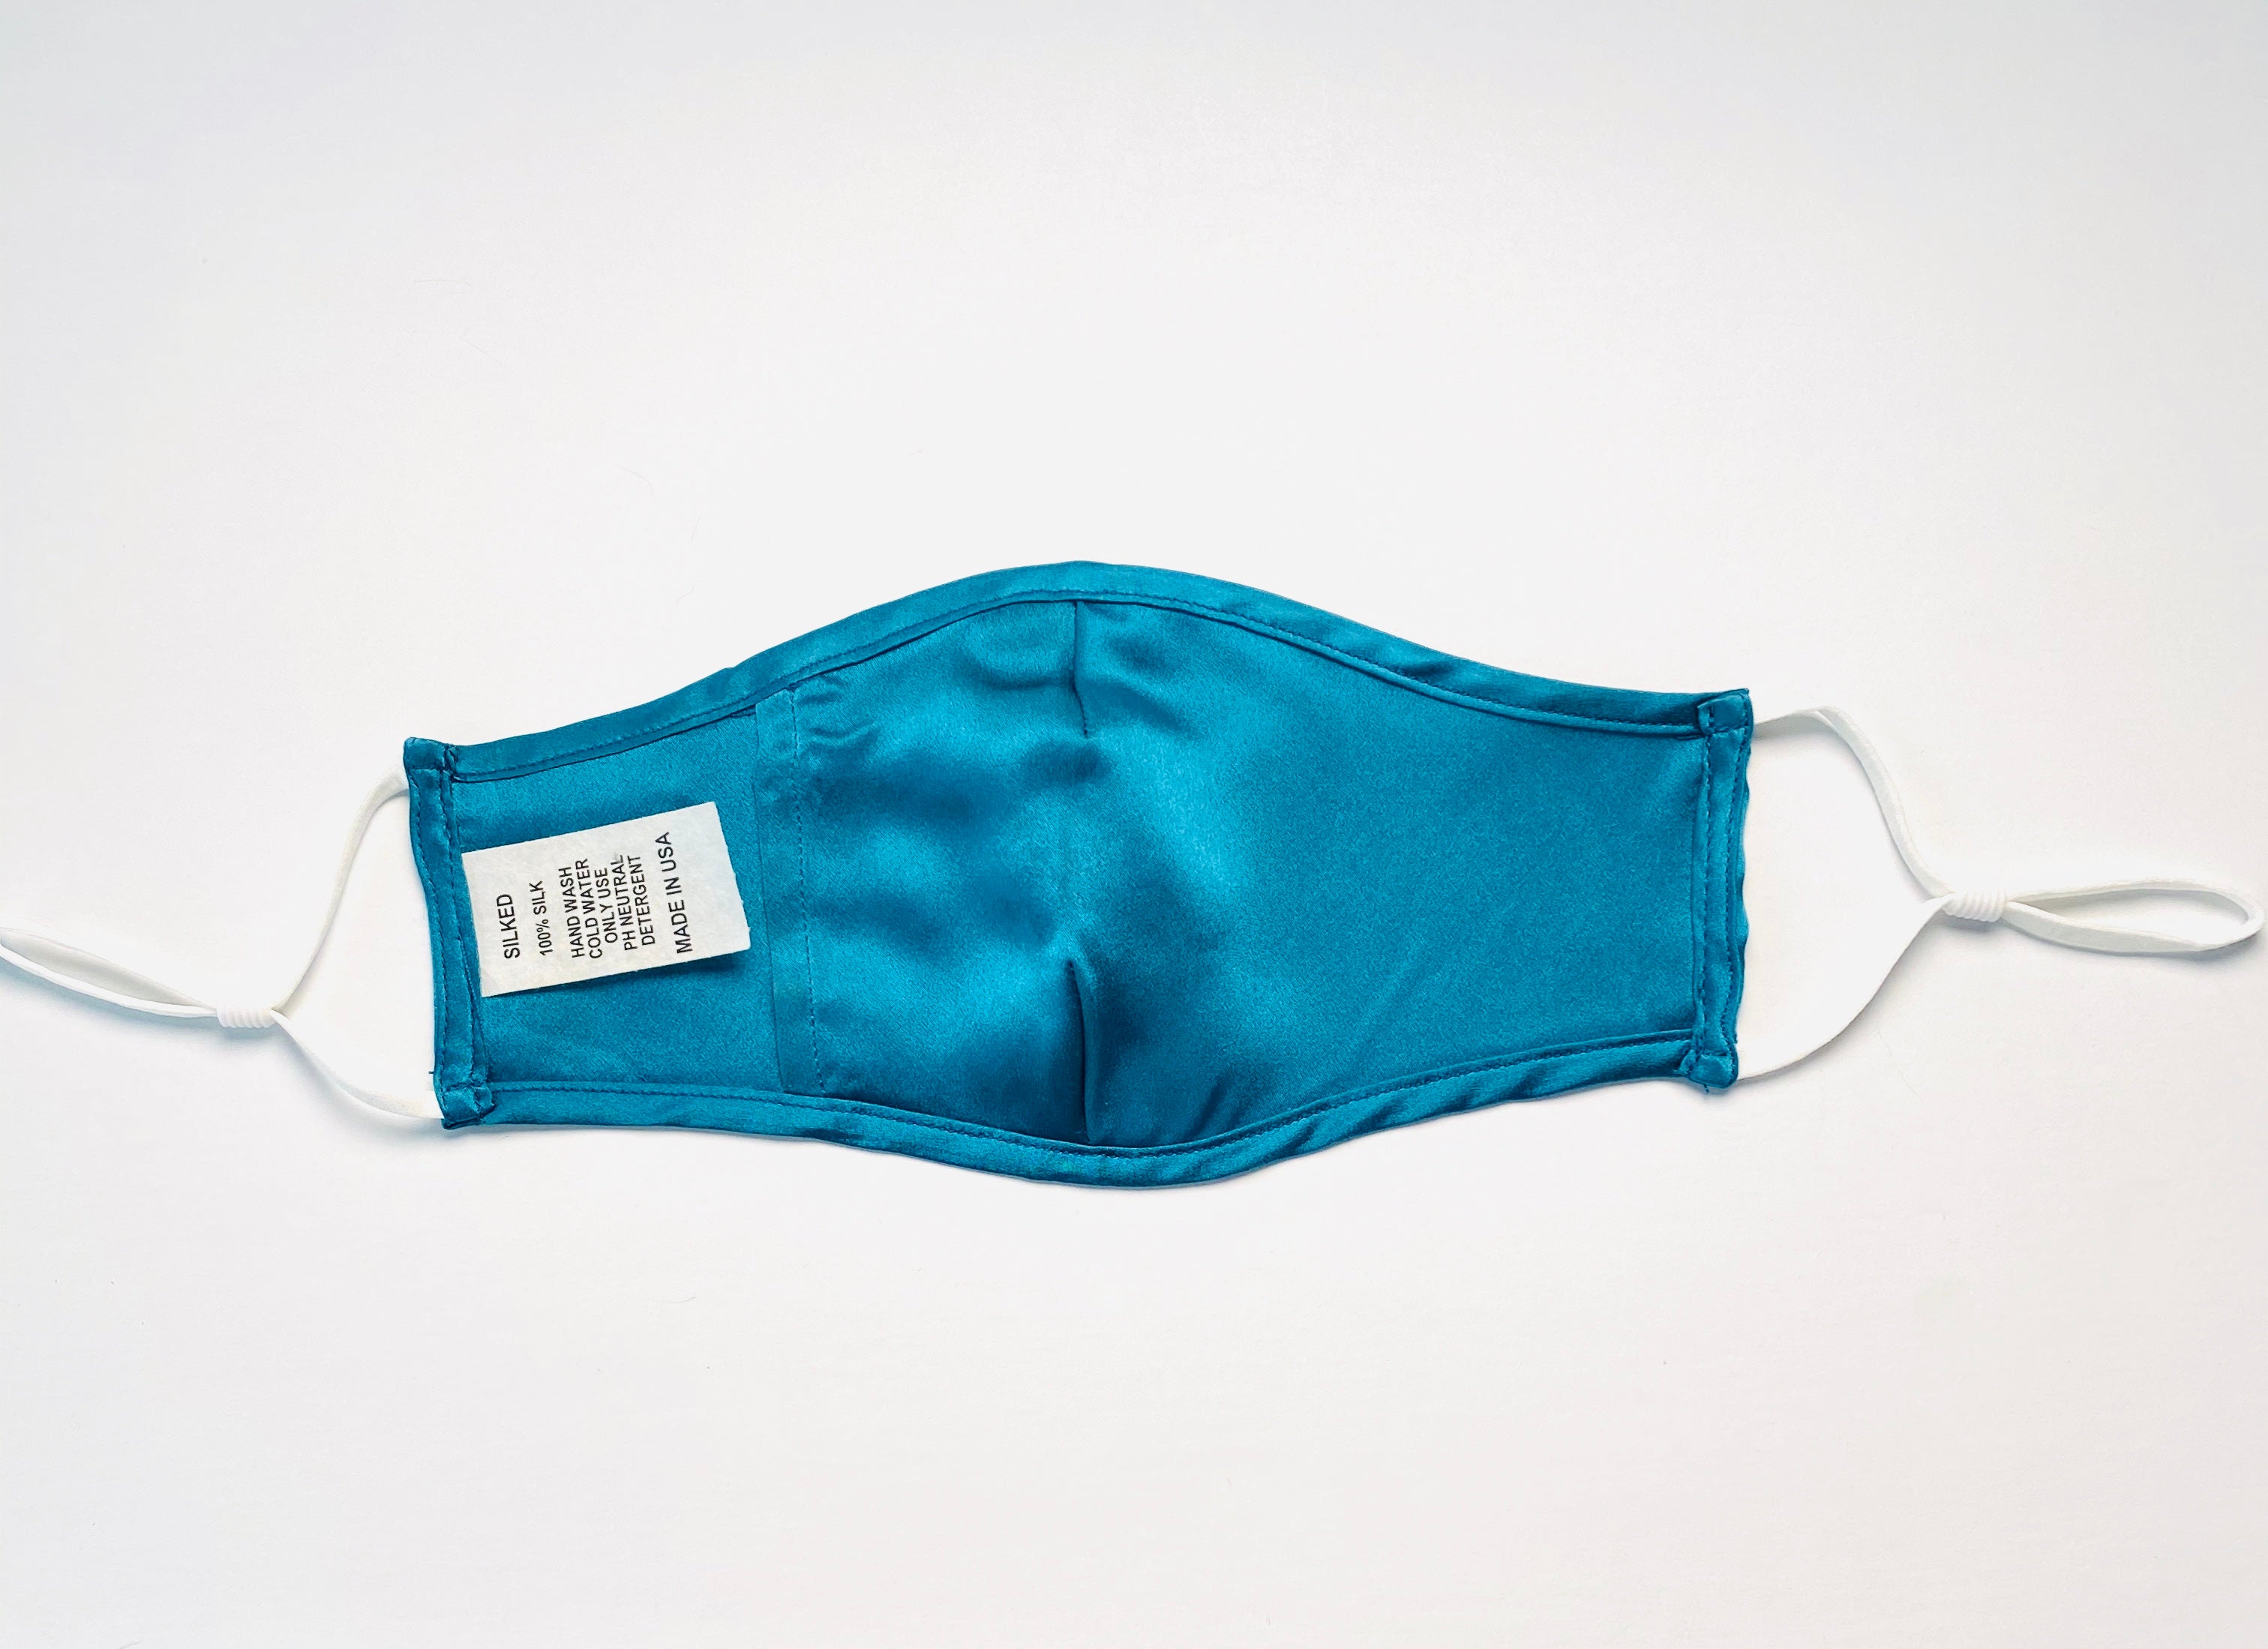 Silk Face Mask, interior pocket to holds n95 filter, non-surgical, great for skin protection made in USA